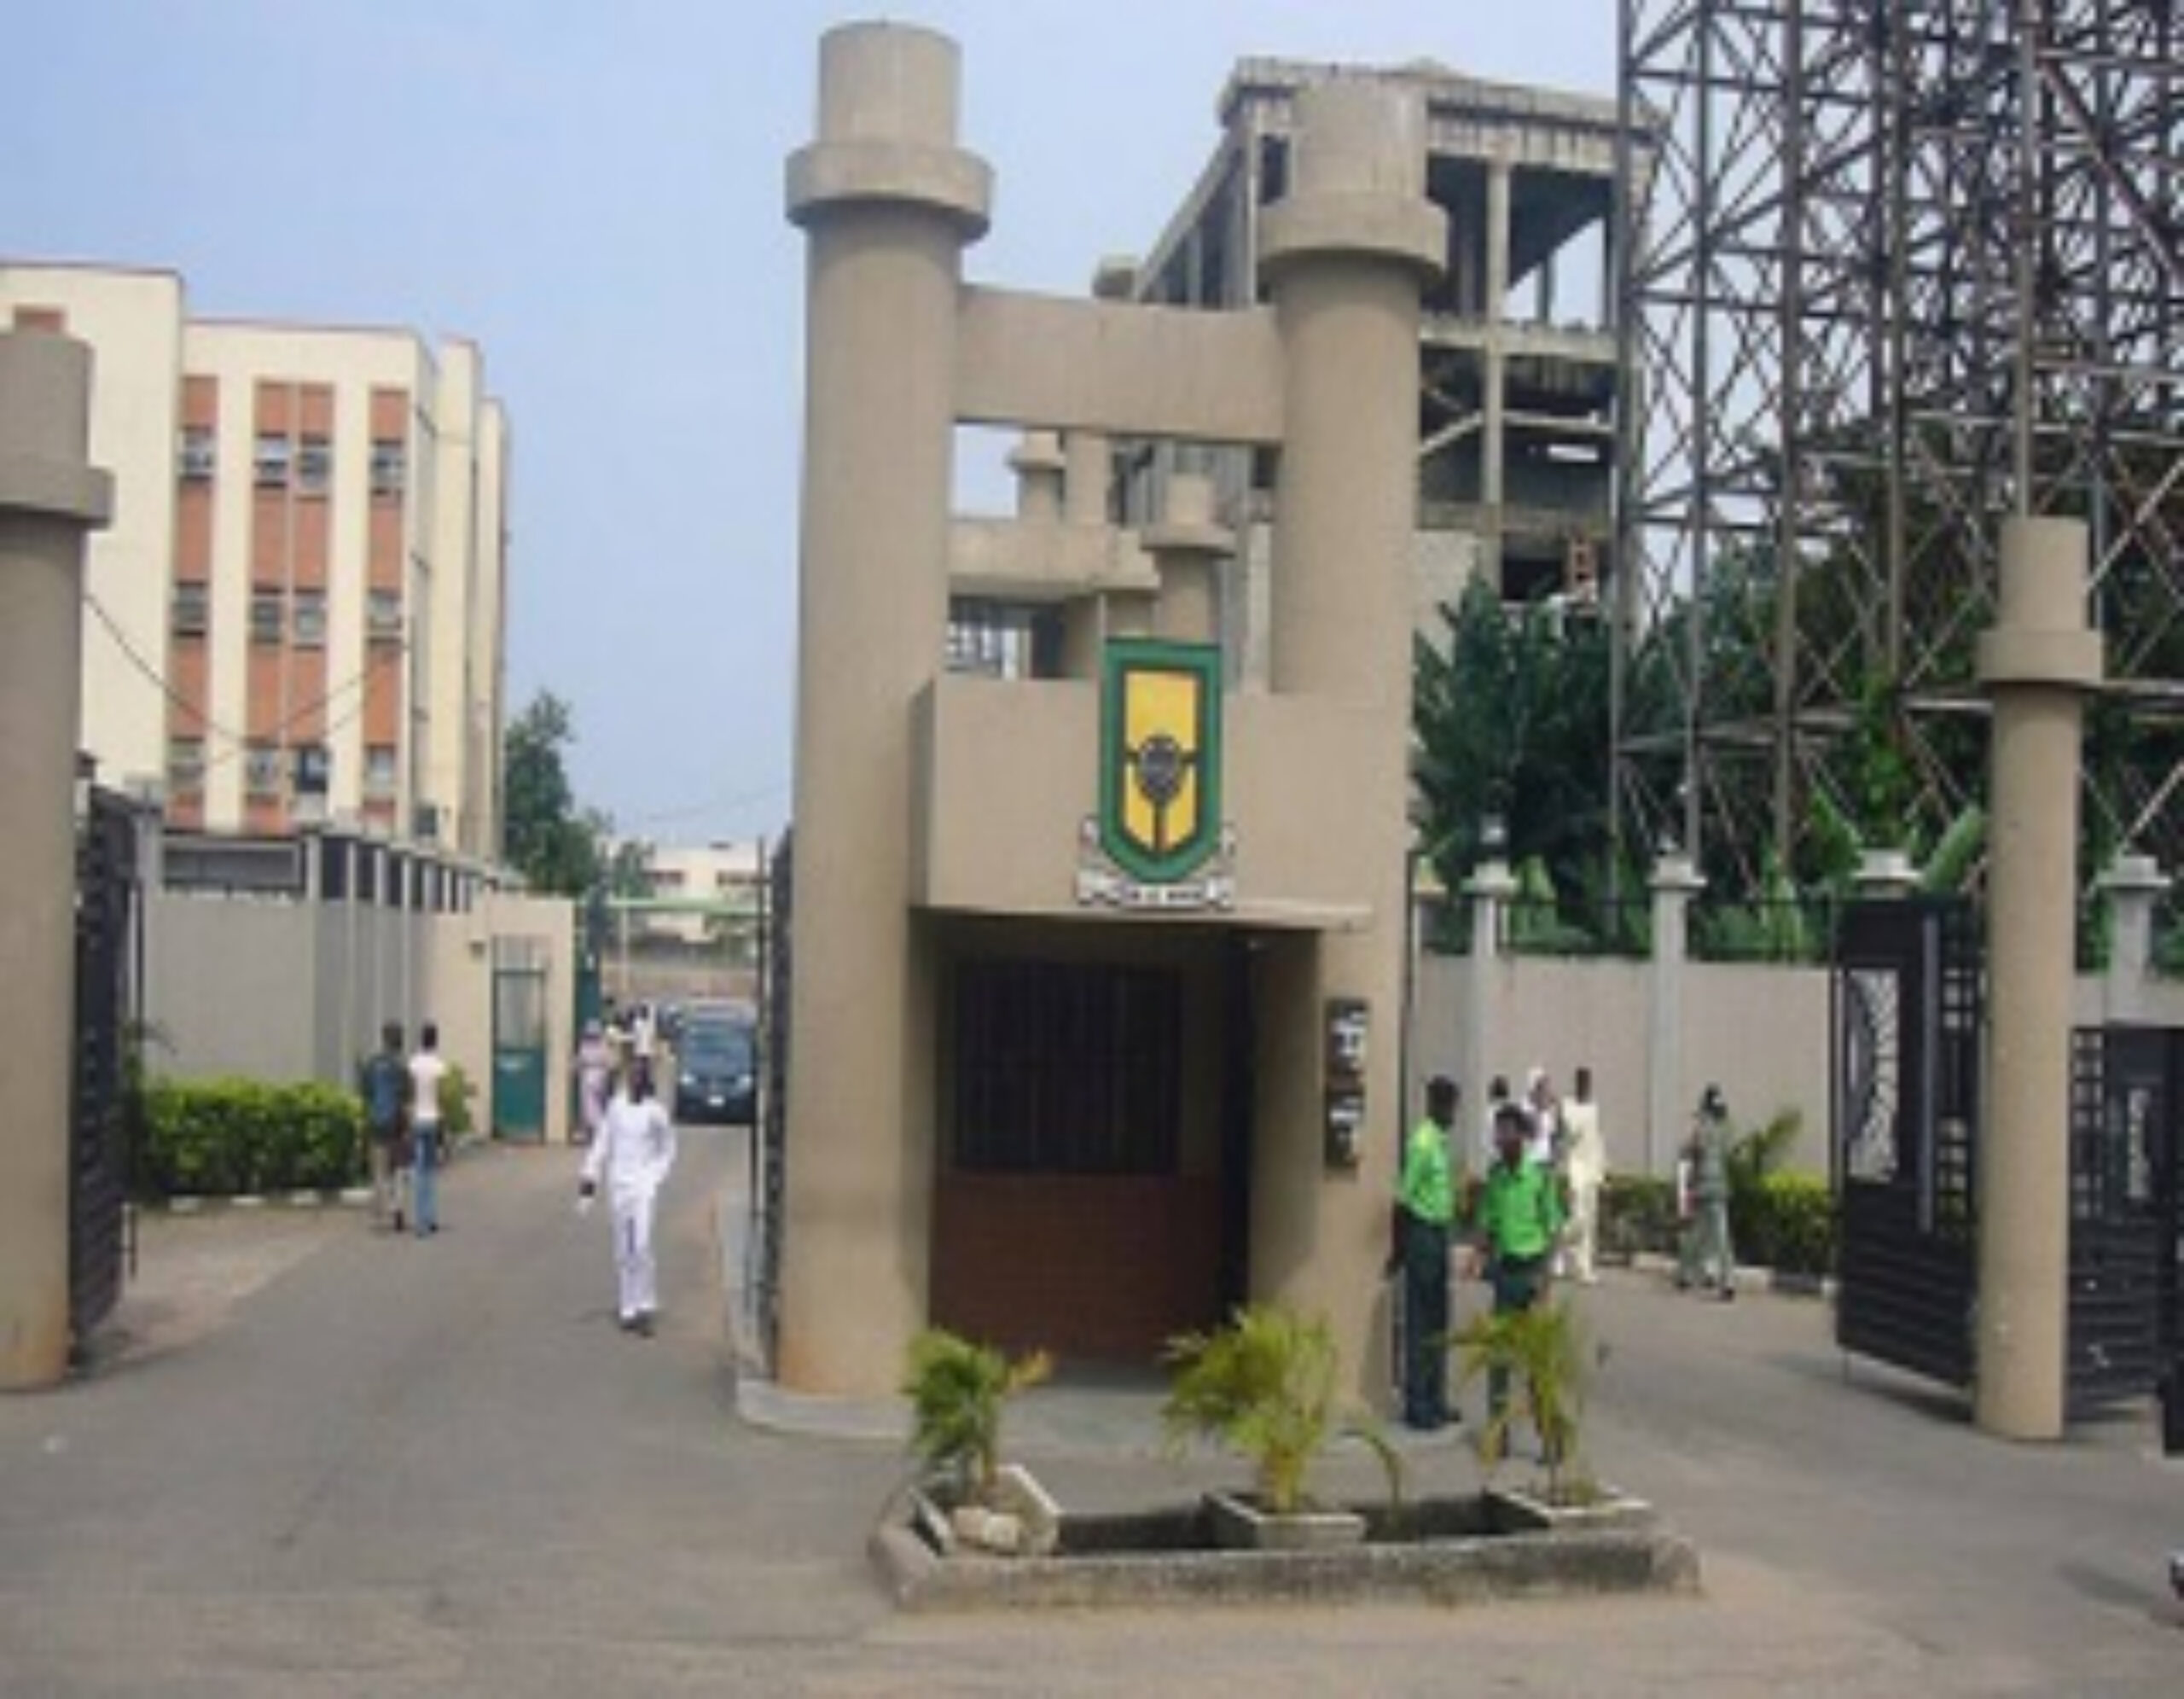 YABATECH Departmental Cut Off Marks 2020/2021 | ND & Degree Yaba College of Technology, YABATECH Departmental Cut Off Marks for National Diploma (ND) Full-time and Degree B.Sc (Edu) Programmes for 2020/2021 Admission Exercise. The management of the Yaba College of Technology (YABATECH) has released the departmental cut off marks for the 2020/2021 academic session National Diploma (ND) full-time and B.Sc (Edu) programmes admission exercise. YABATECH Departmental Cut Off Marks 2020/2021 | ND Full & B.Sc (Edu)